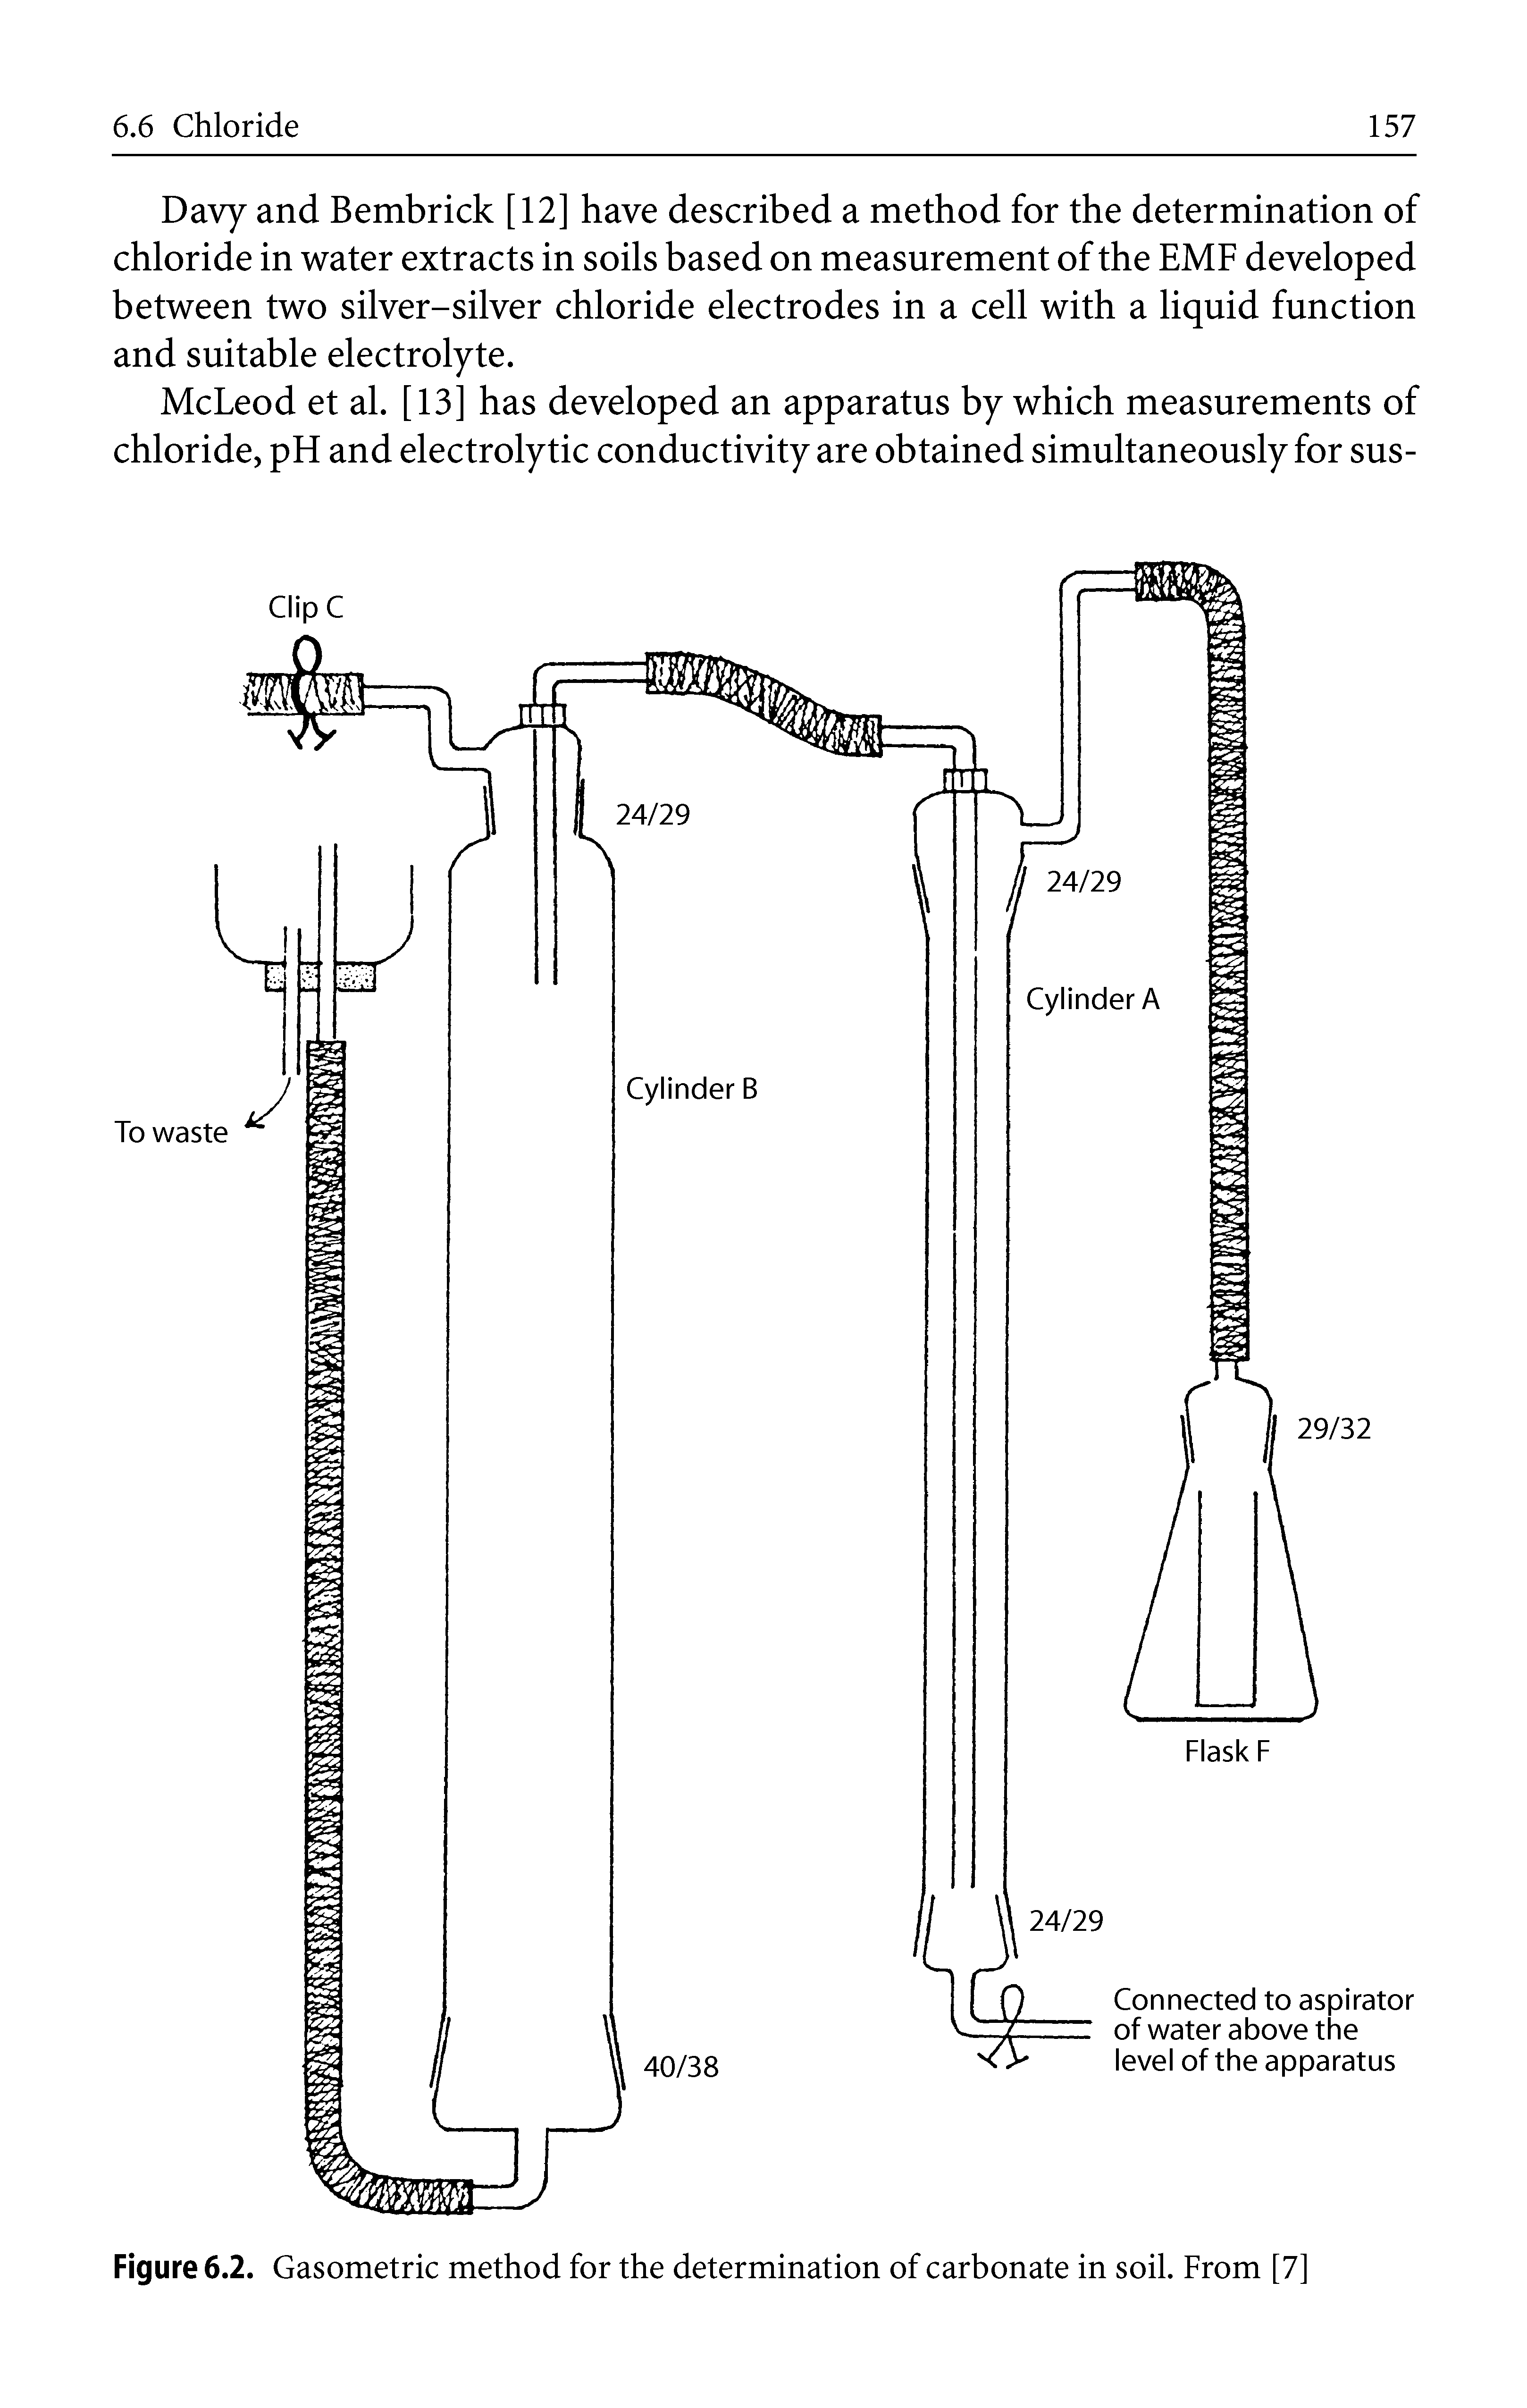 Figure 6.2. Gasometric method for the determination of carbonate in soil. From [7]...